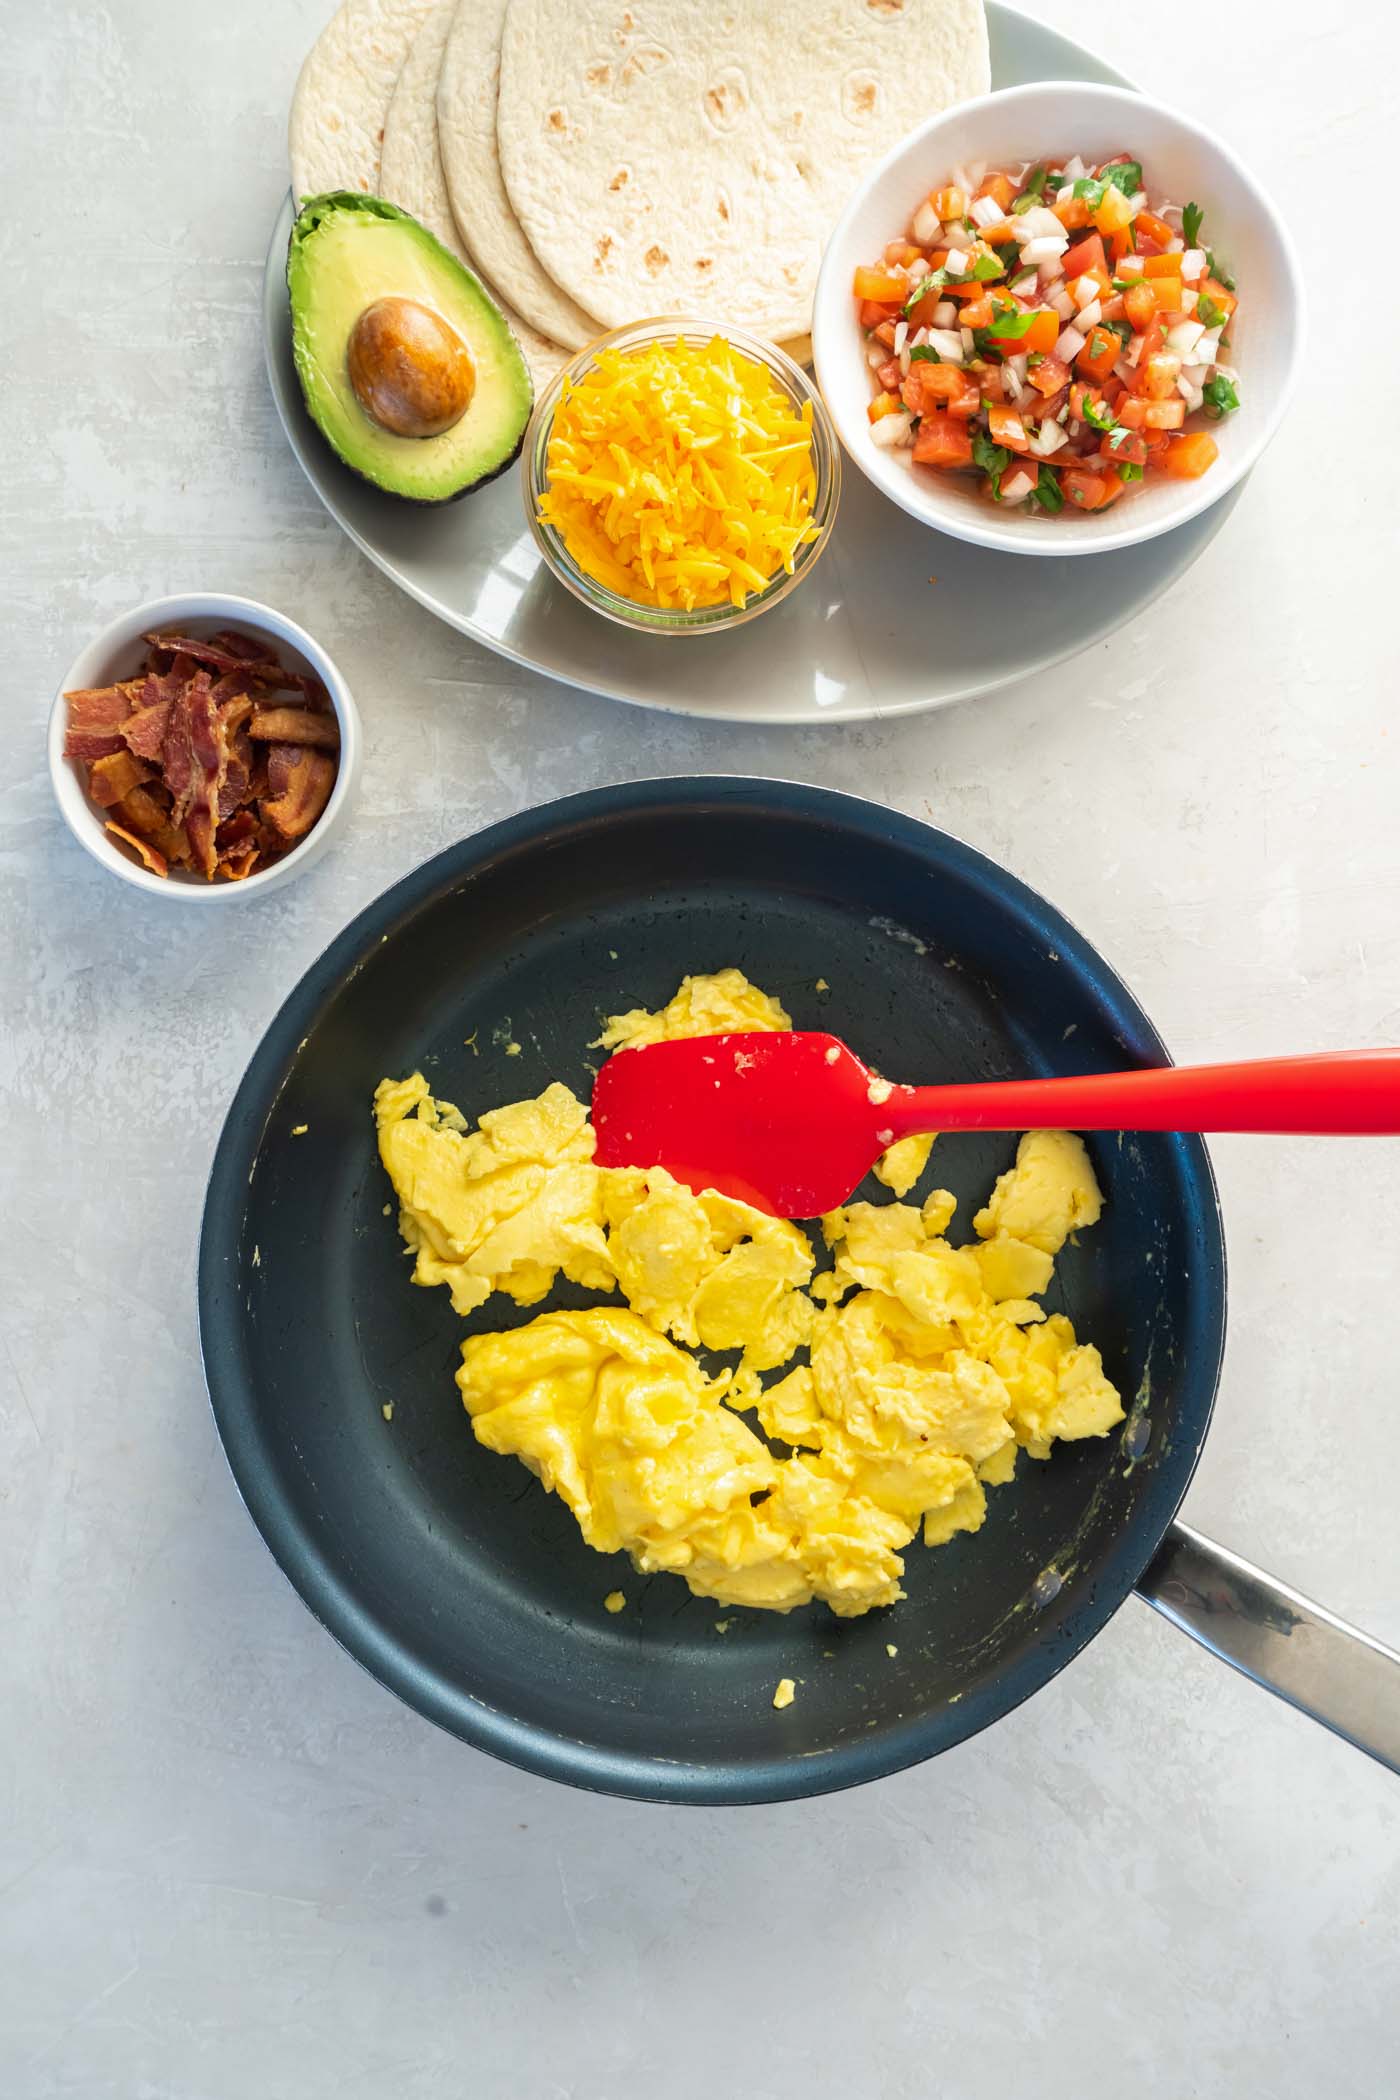 Scrambled eggs in pan with spatula.